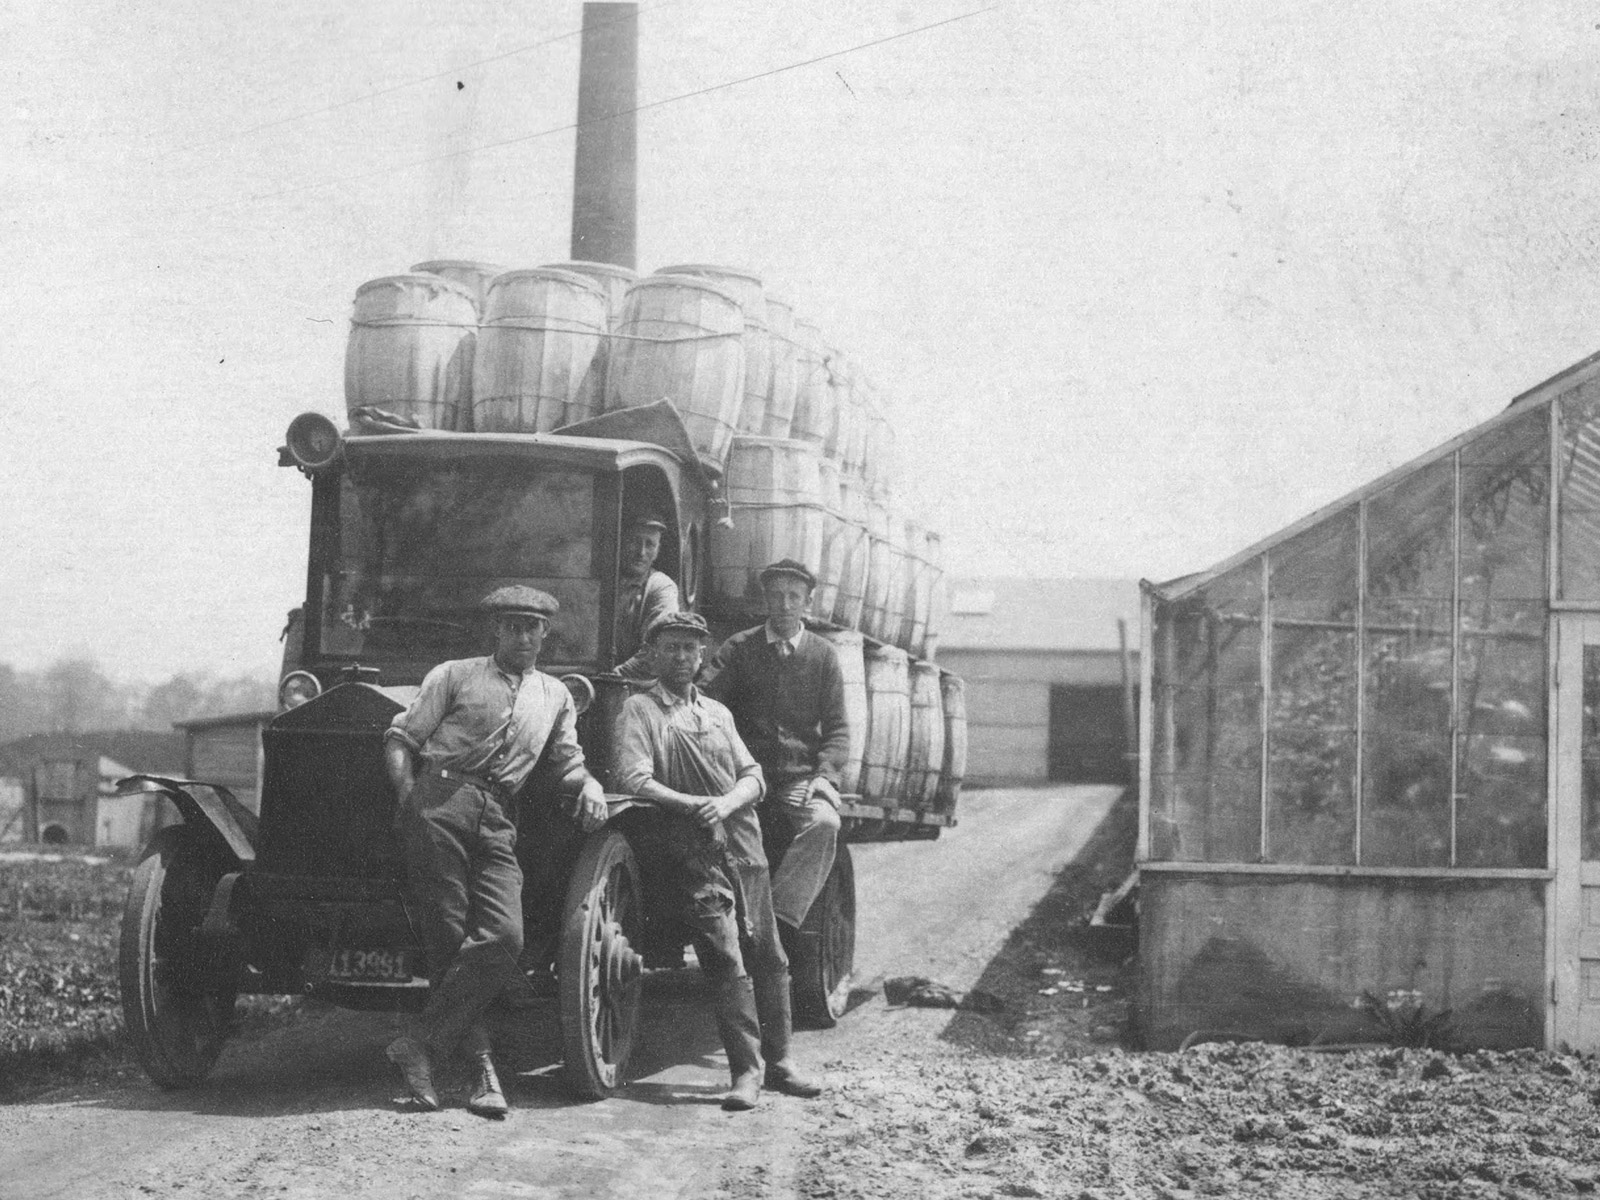 Four of the Miller Brothers are shown at Miller Farm & Greenhouse in Northwest Ohio sometime after the greenhouse was founded in 1920.